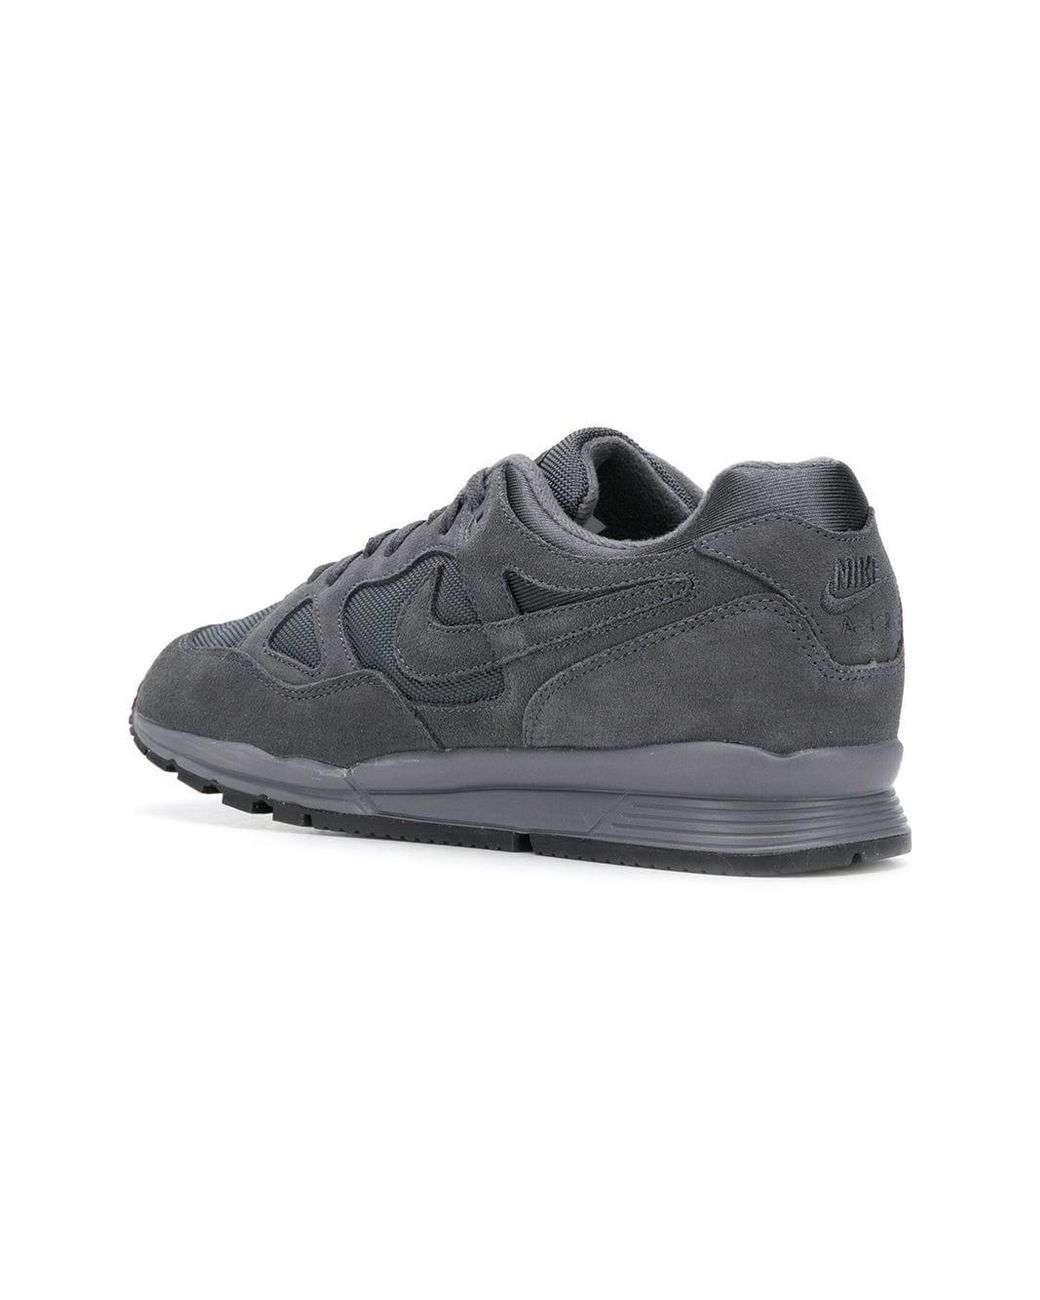 Respetuoso del medio ambiente Contable Paternal Nike Air Span 2 Prm Shoes - Size 9.5 in Grey for Men | Lyst UK